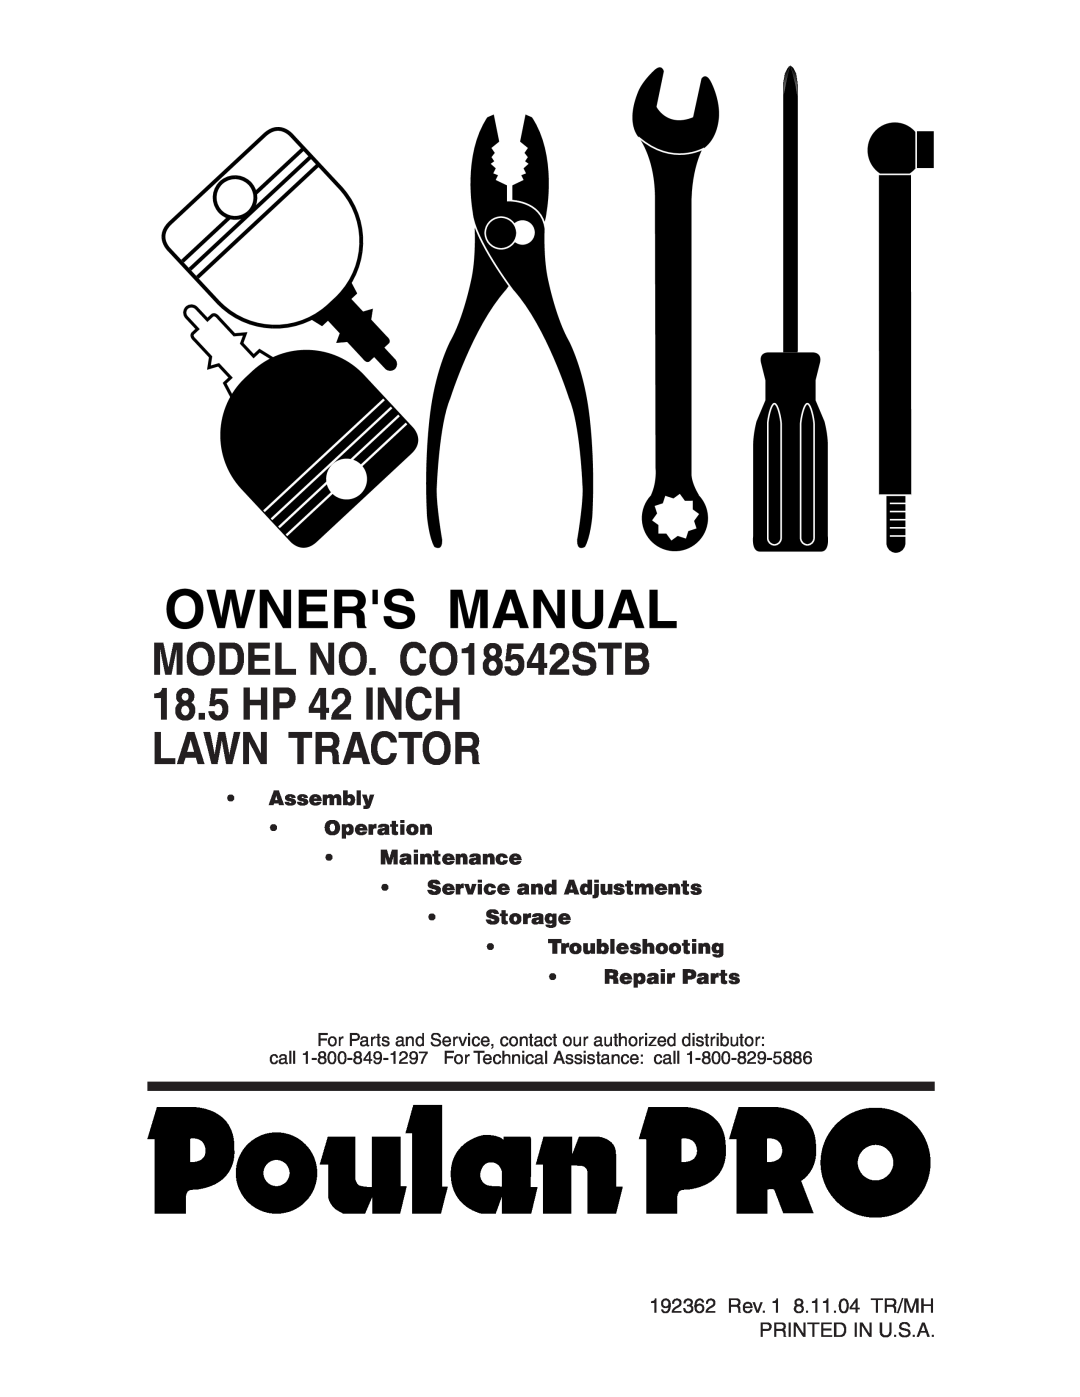 Poulan 192362 manual MODEL NO. CO18542STB, 18.5HP 42 INCH LAWN TRACTOR, Assembly Operation Maintenance 